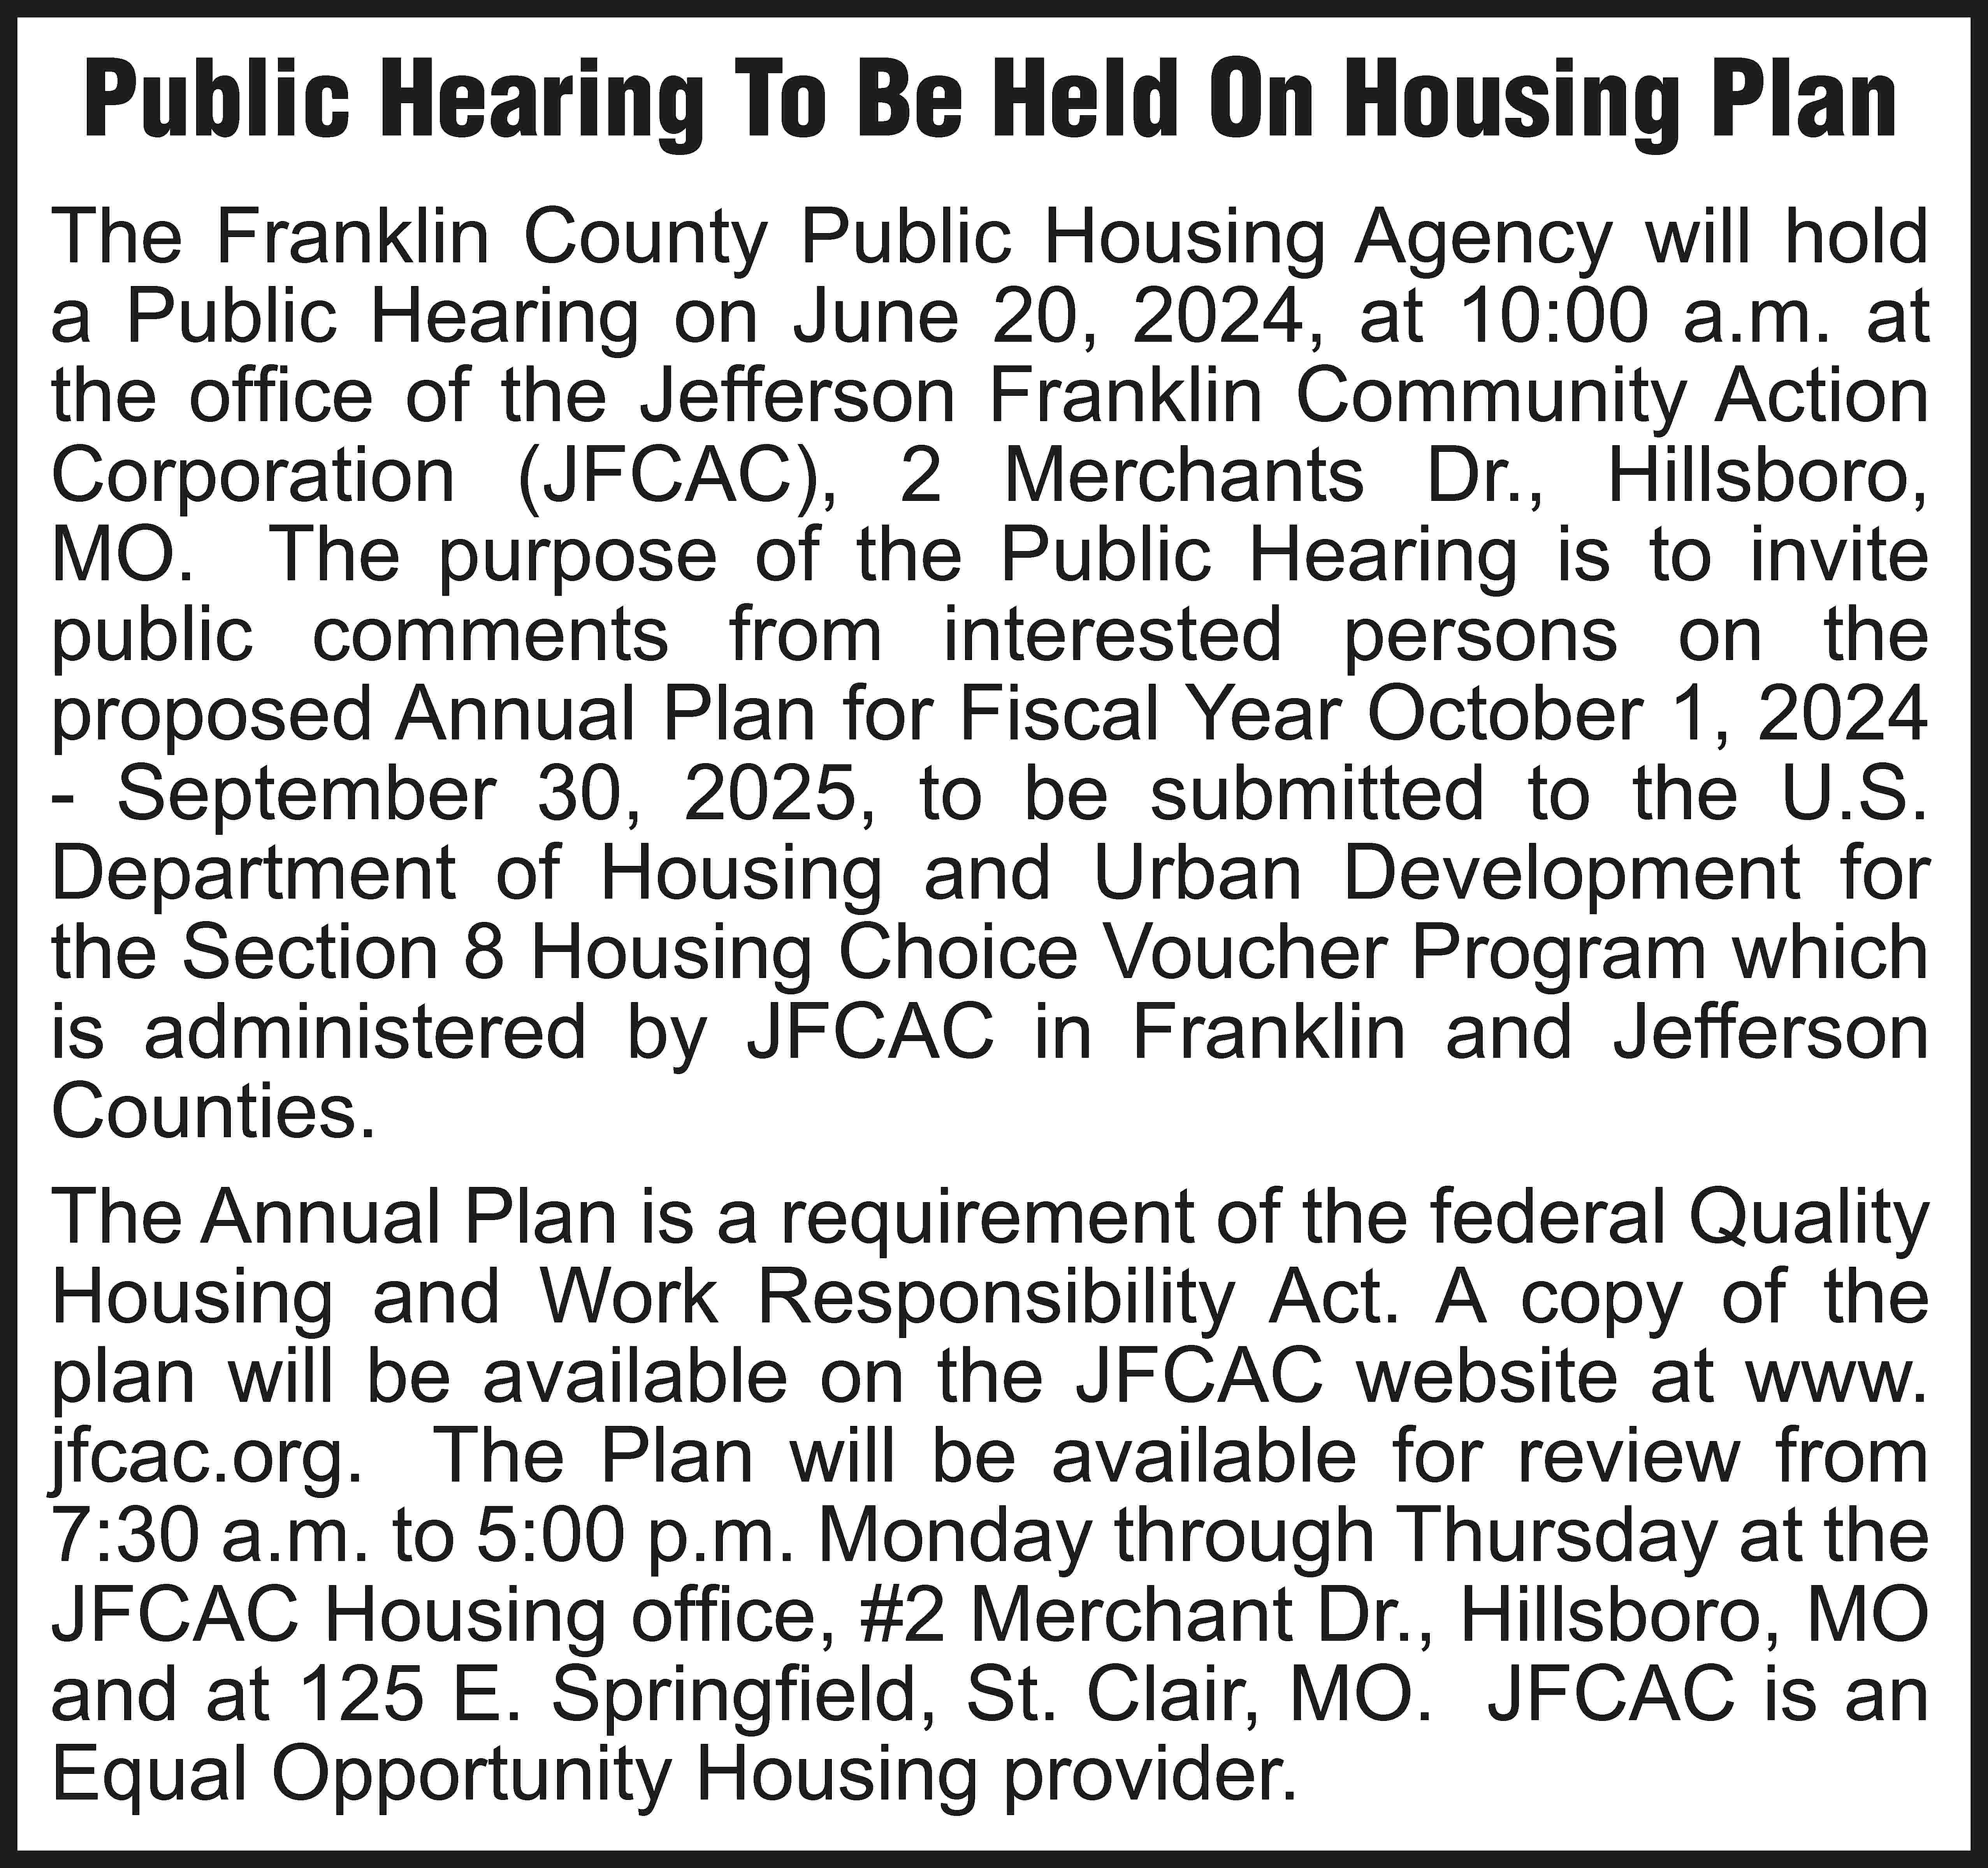 Public Hearing To Be Held  Public Hearing To Be Held On Housing Plan The Franklin County Public Housing Agency will hold a Public Hearing on June 20, 2024, at 10:00 a.m. at the office of the Jefferson Franklin Community Action Corporation (JFCAC), 2 Merchants Dr., Hillsboro, MO. The purpose of the Public Hearing is to invite public comments from interested persons on the proposed Annual Plan for Fiscal Year October 1, 2024 - September 30, 2025, to be submitted to the U.S. Department of Housing and Urban Development for the Section 8 Housing Choice Voucher Program which is administered by JFCAC in Franklin and Jefferson Counties. The Annual Plan is a requirement of the federal Quality Housing and Work Responsibility Act. A copy of the plan will be available on the JFCAC website at www. jfcac.org. The Plan will be available for review from 7:30 a.m. to 5:00 p.m. Monday through Thursday at the JFCAC Housing office, #2 Merchant Dr., Hillsboro, MO and at 125 E. Springfield, St. Clair, MO. JFCAC is an Equal Opportunity Housing provider.